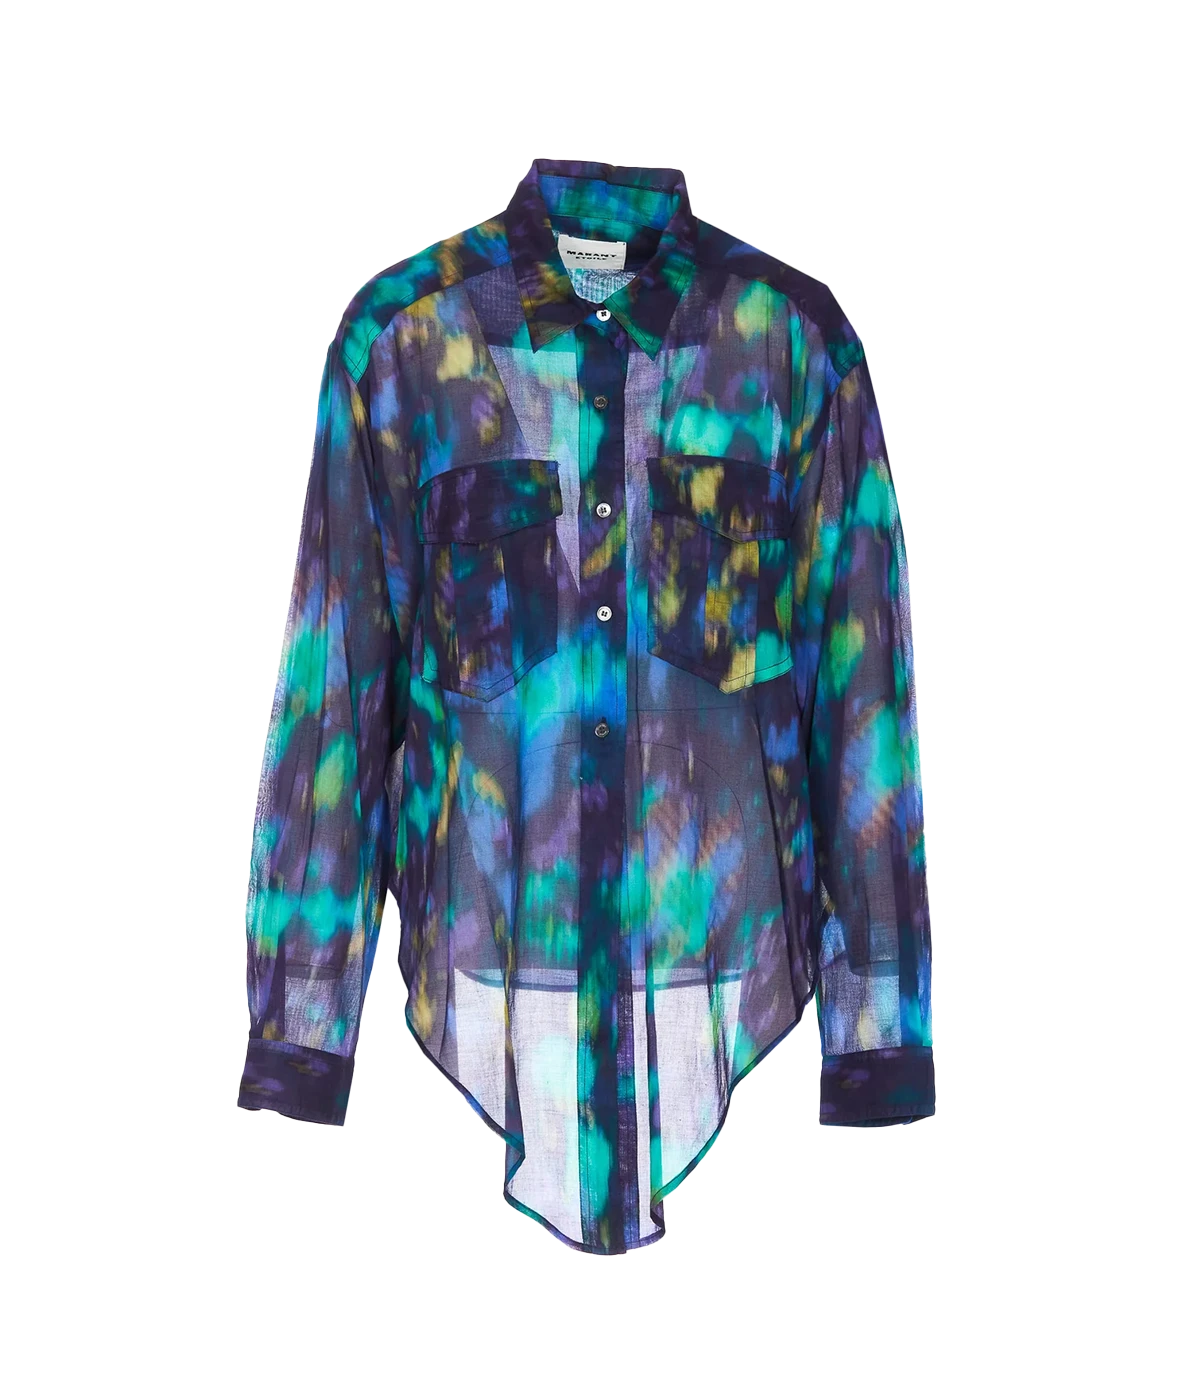 Long sleeve high low front button shirt by Isabel Marant. Wash and wear, bra friendly, versatile addition to your wardrobe. Bold blue hue tie dye pattern 